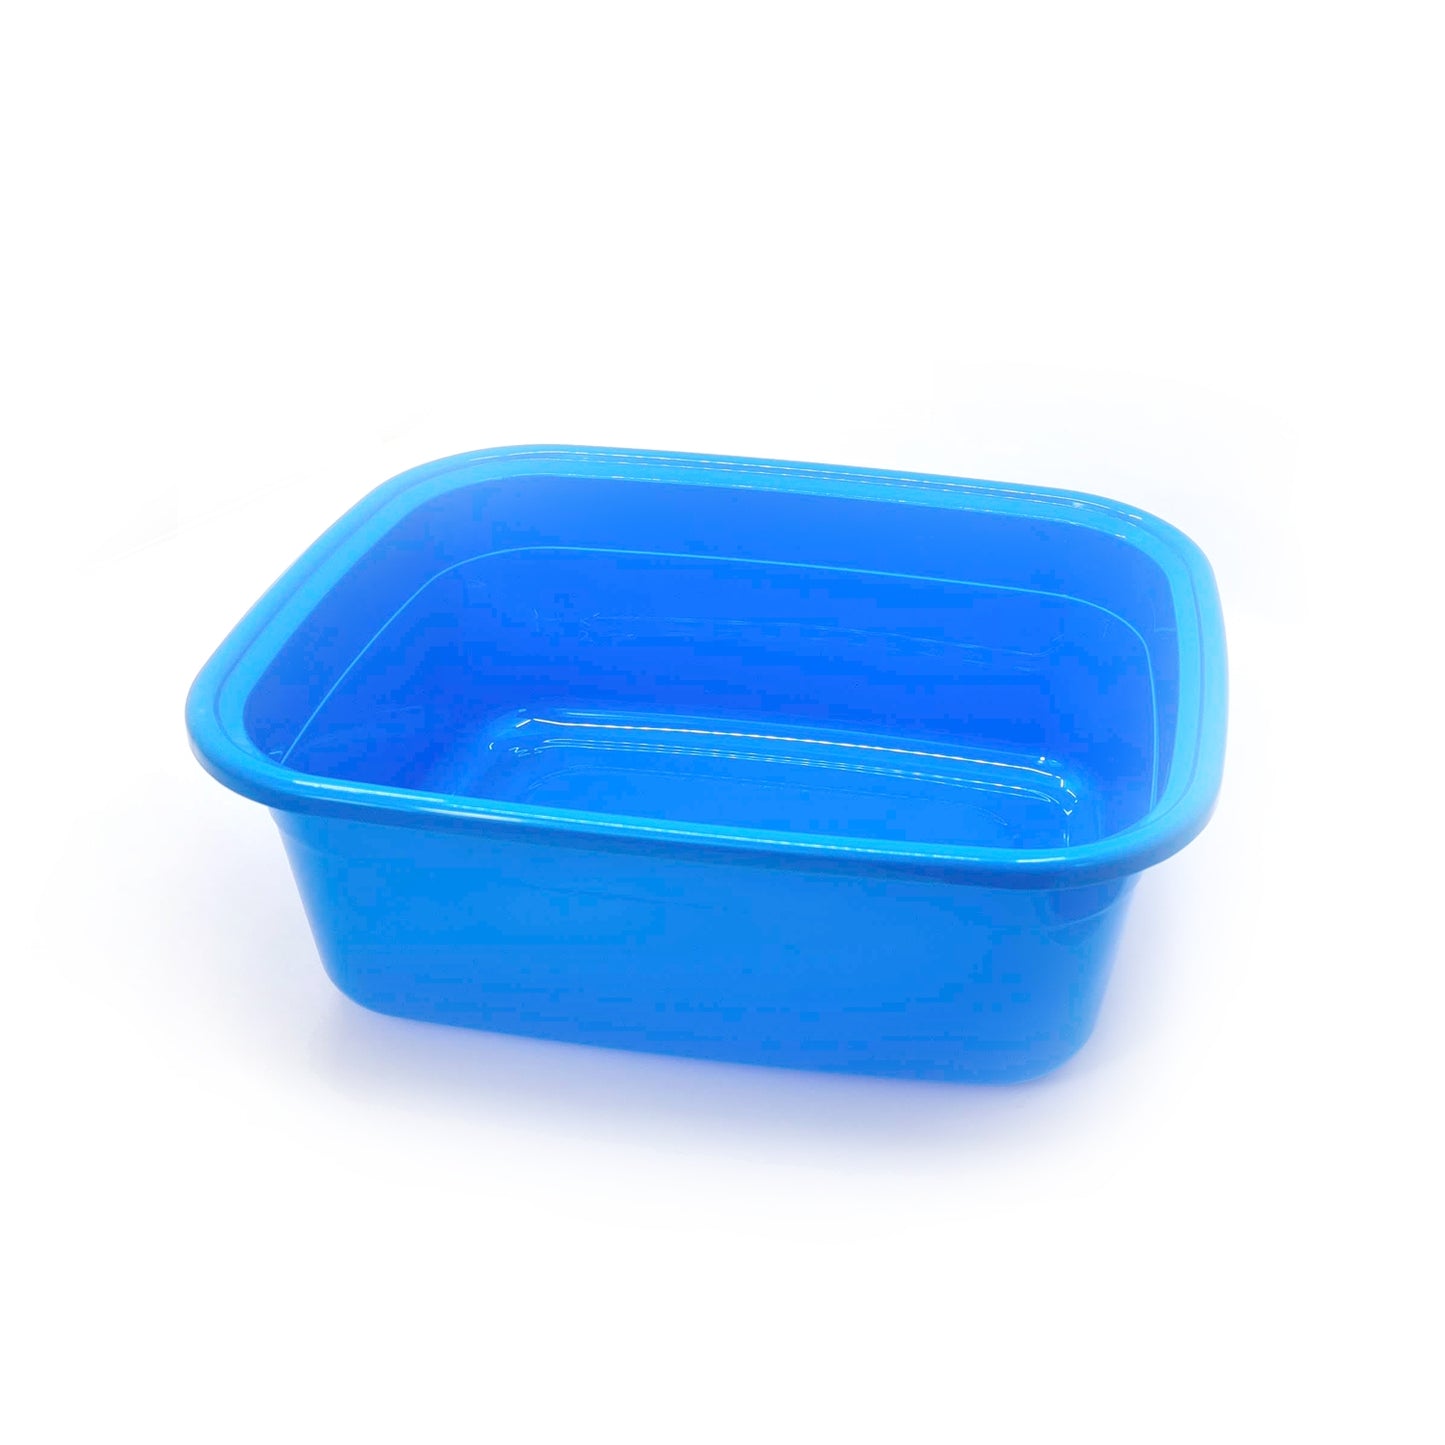 Replacement Bowl for Classroom Washing Table